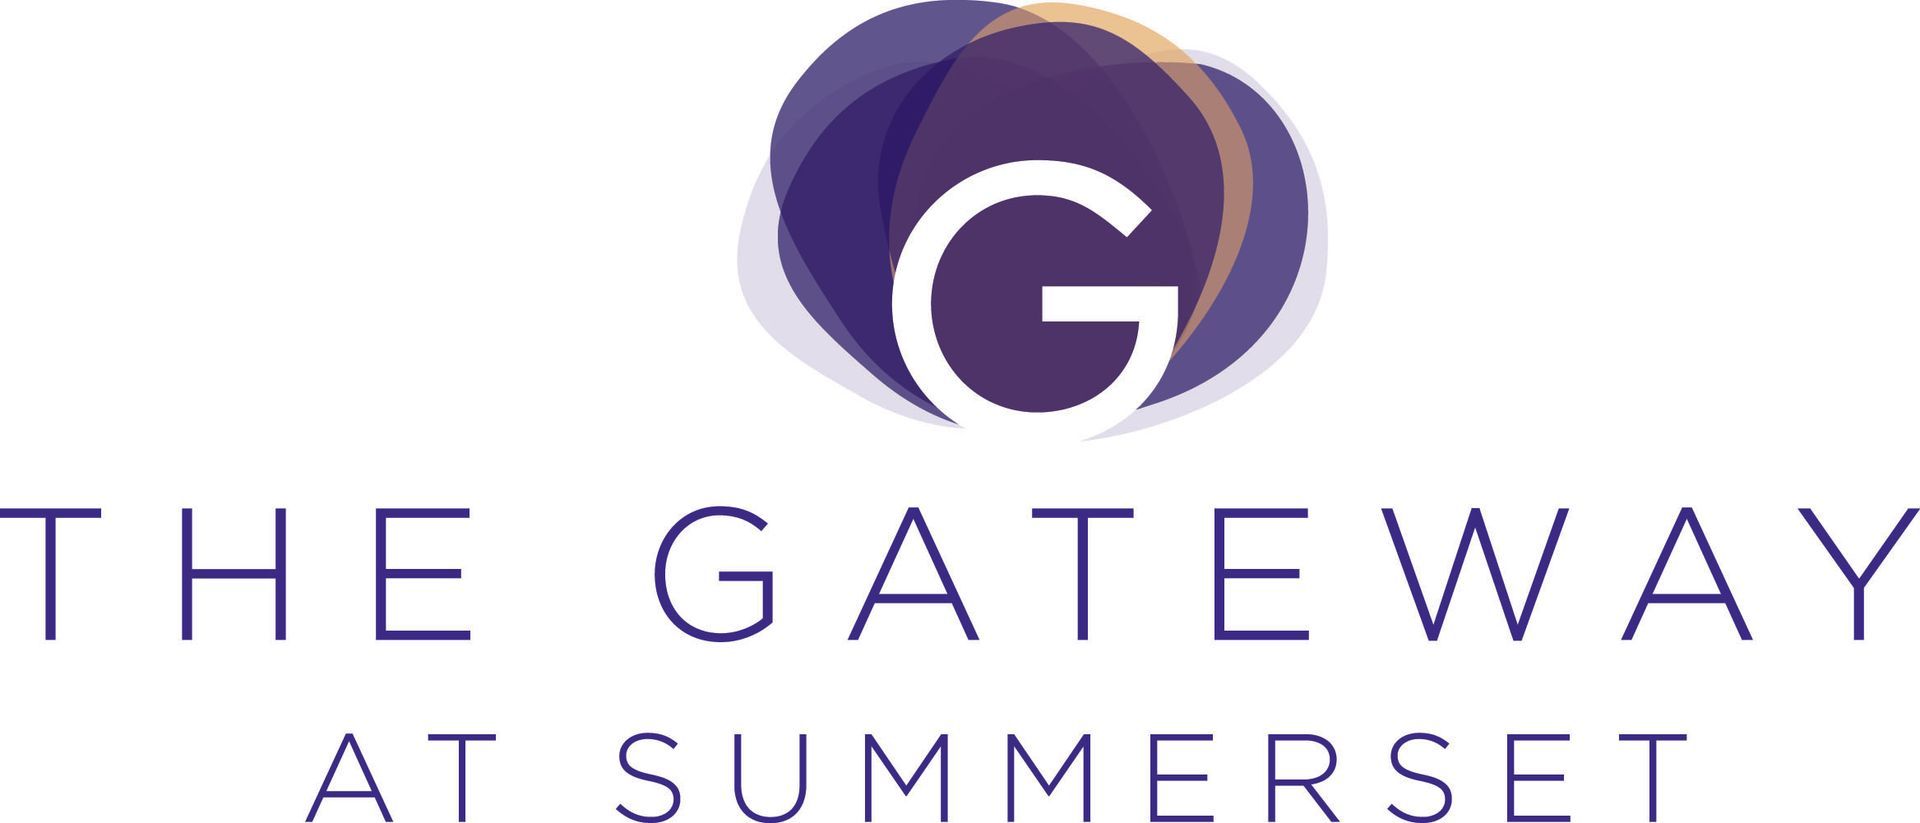 The Gateway at Summerset company logo - click to go to home page